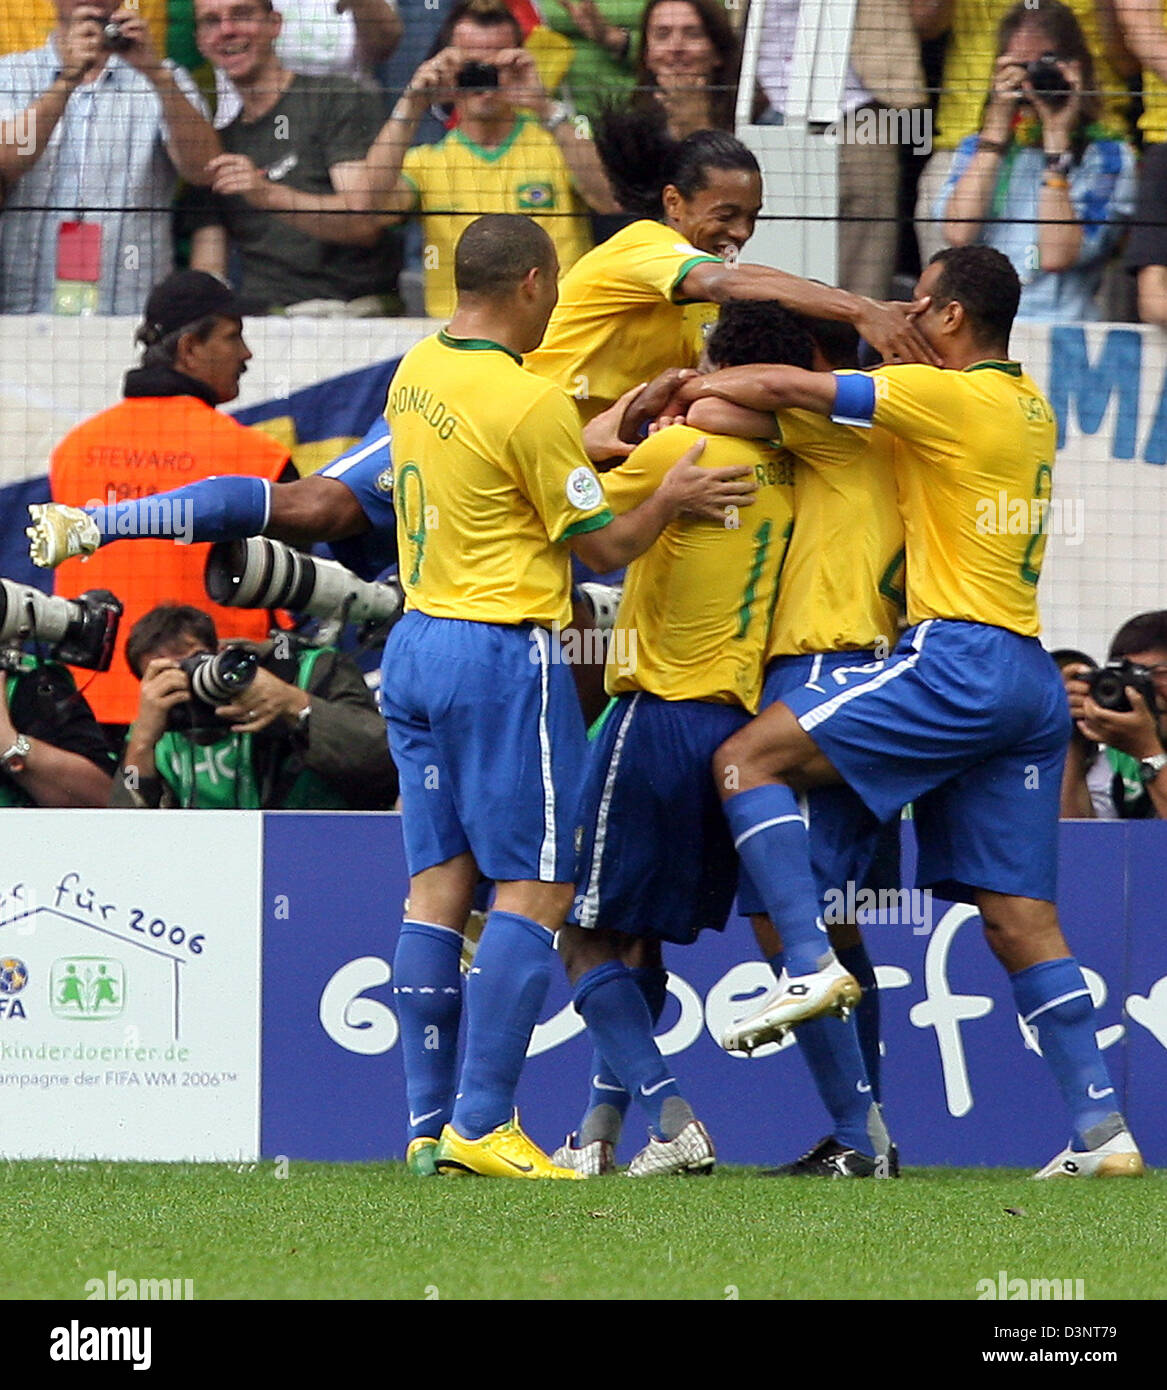 Ze Roberto (hidden 11) from Brazil celebrates after scoring the 3-0 lead with his teammates Ronaldo (L), Ronaldinho (top) and Cafu (R) during the 2nd round match of the 2006 FIFA World Cup between Brazil and Ghana in Dortmund, Germany, Tuesday, 27 June 2006. Photo: ACHIM SCHEIDEMANN +++ Mobile Services OUT +++ Please refer to FIFA's terms and conditions. Stock Photo